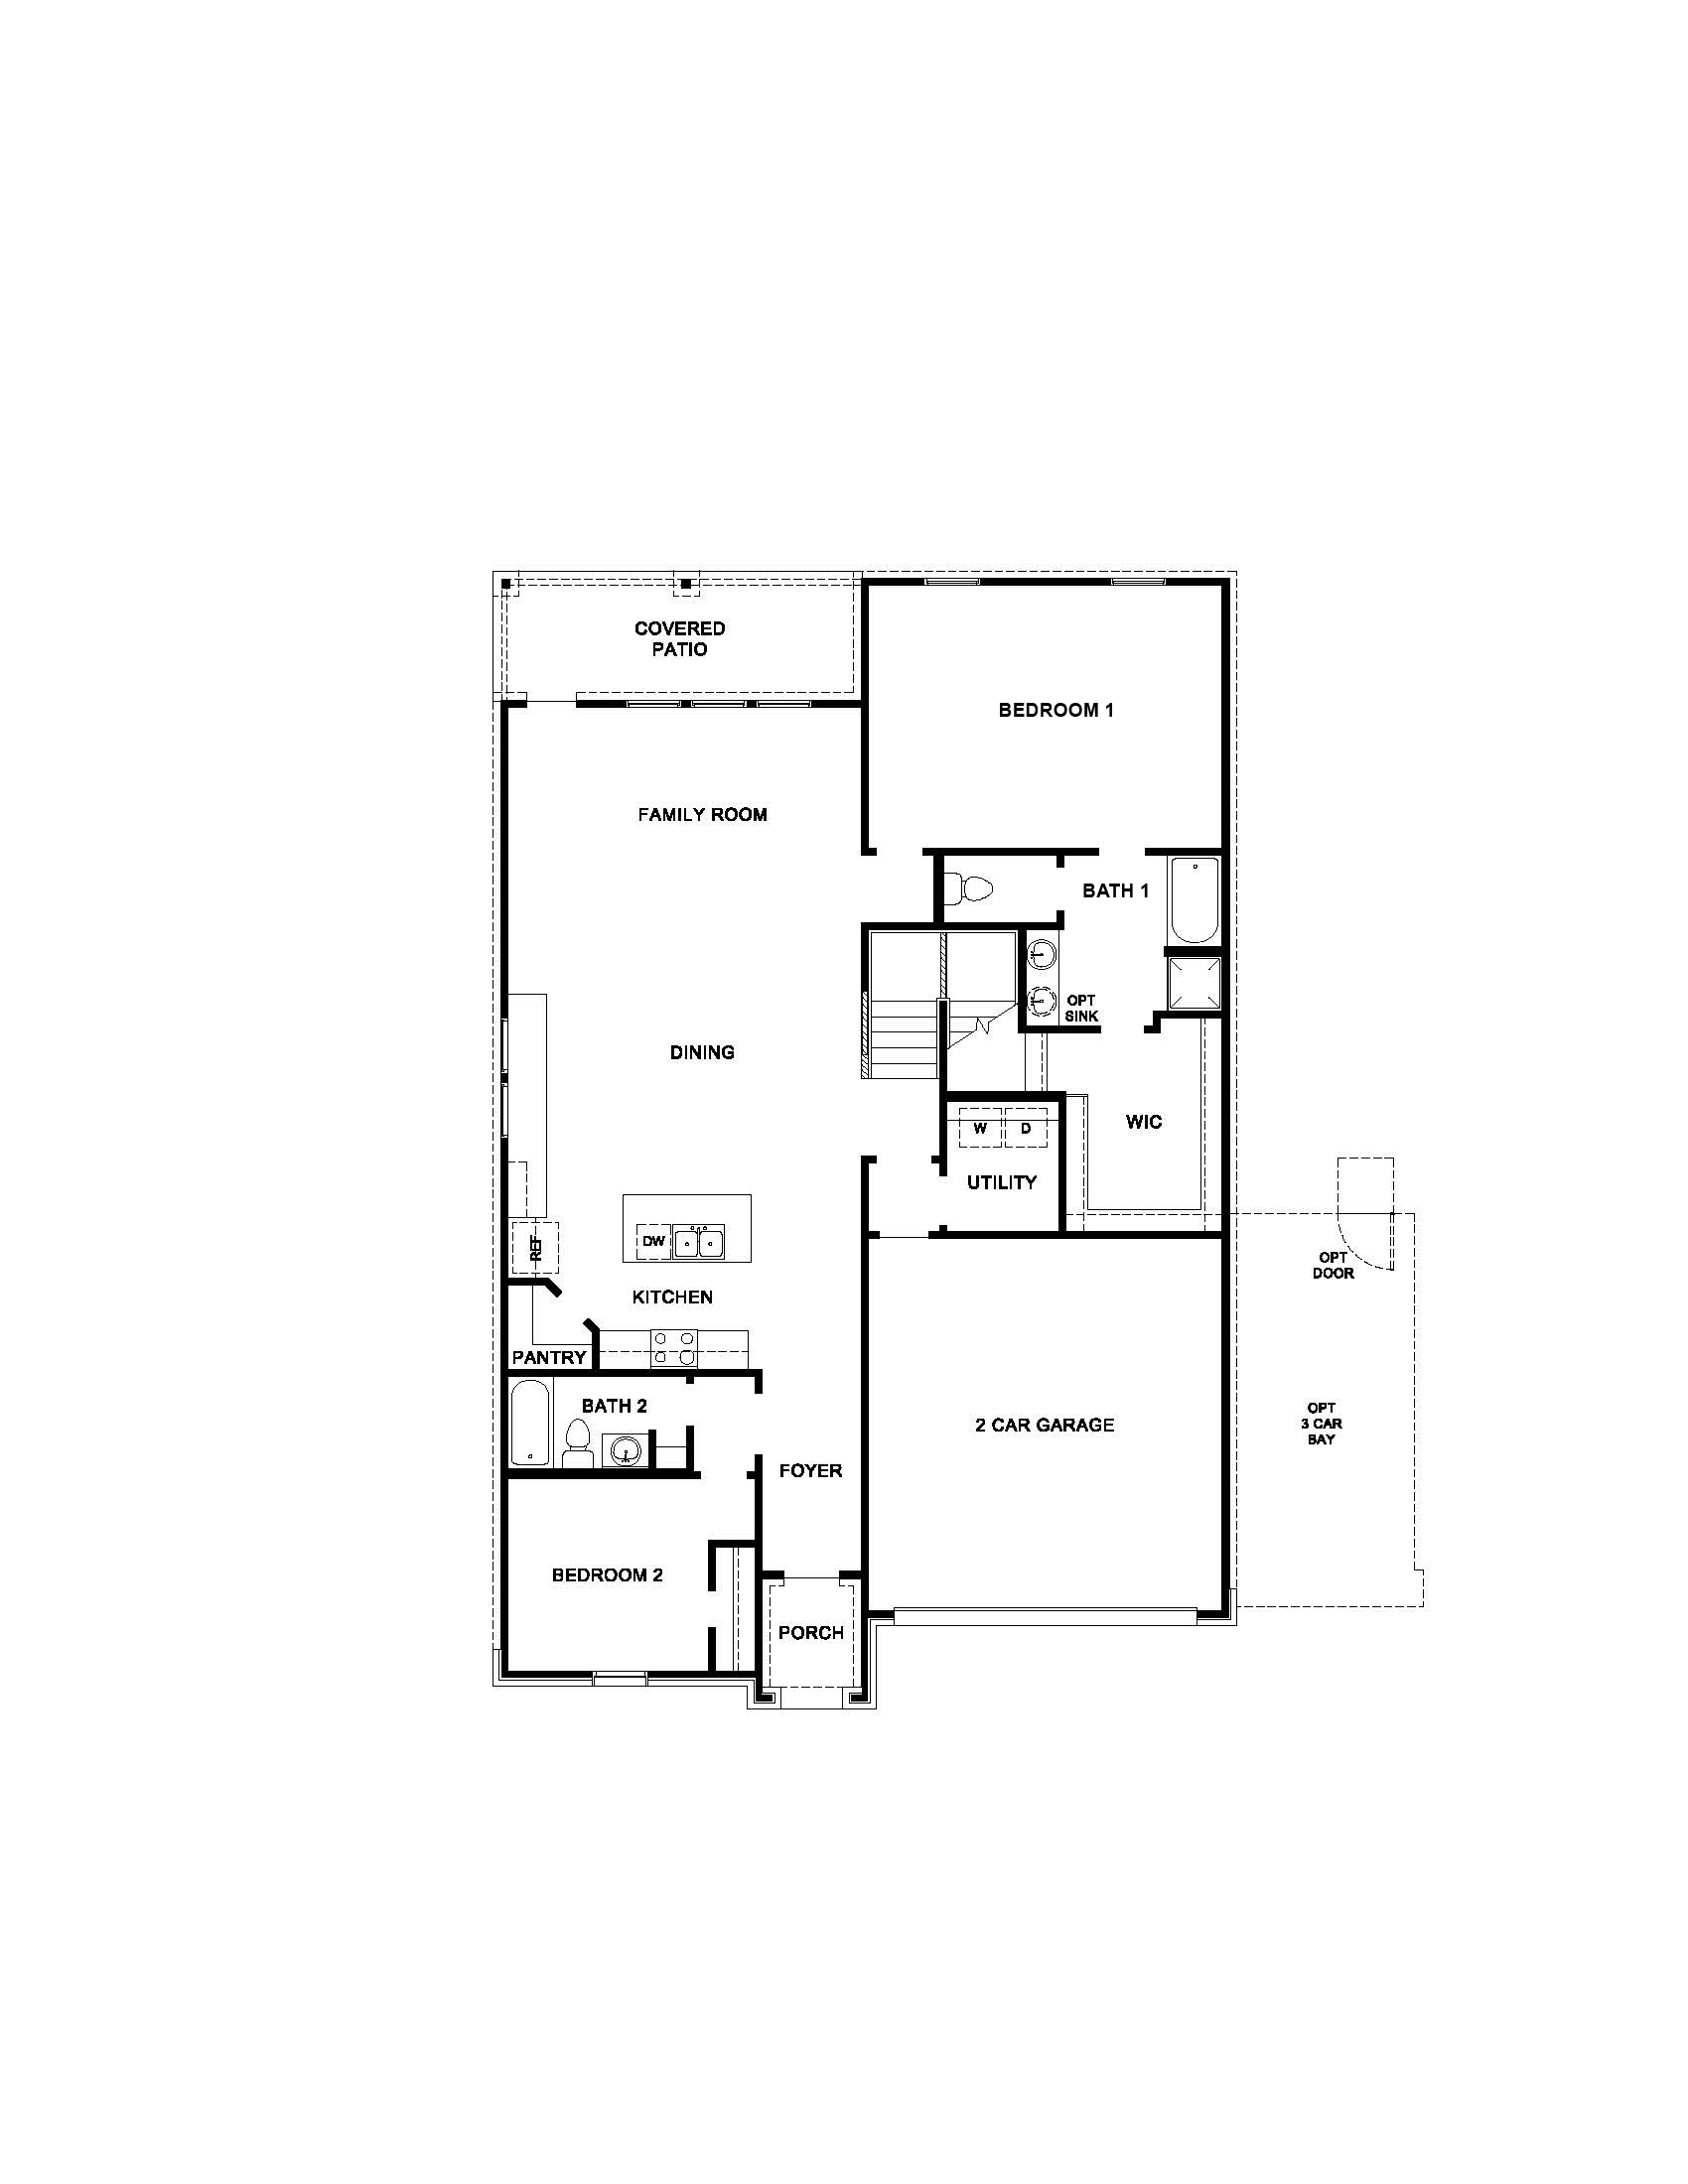 DR Horton Houston North Butlers Bend - E40 R First Floor Plan